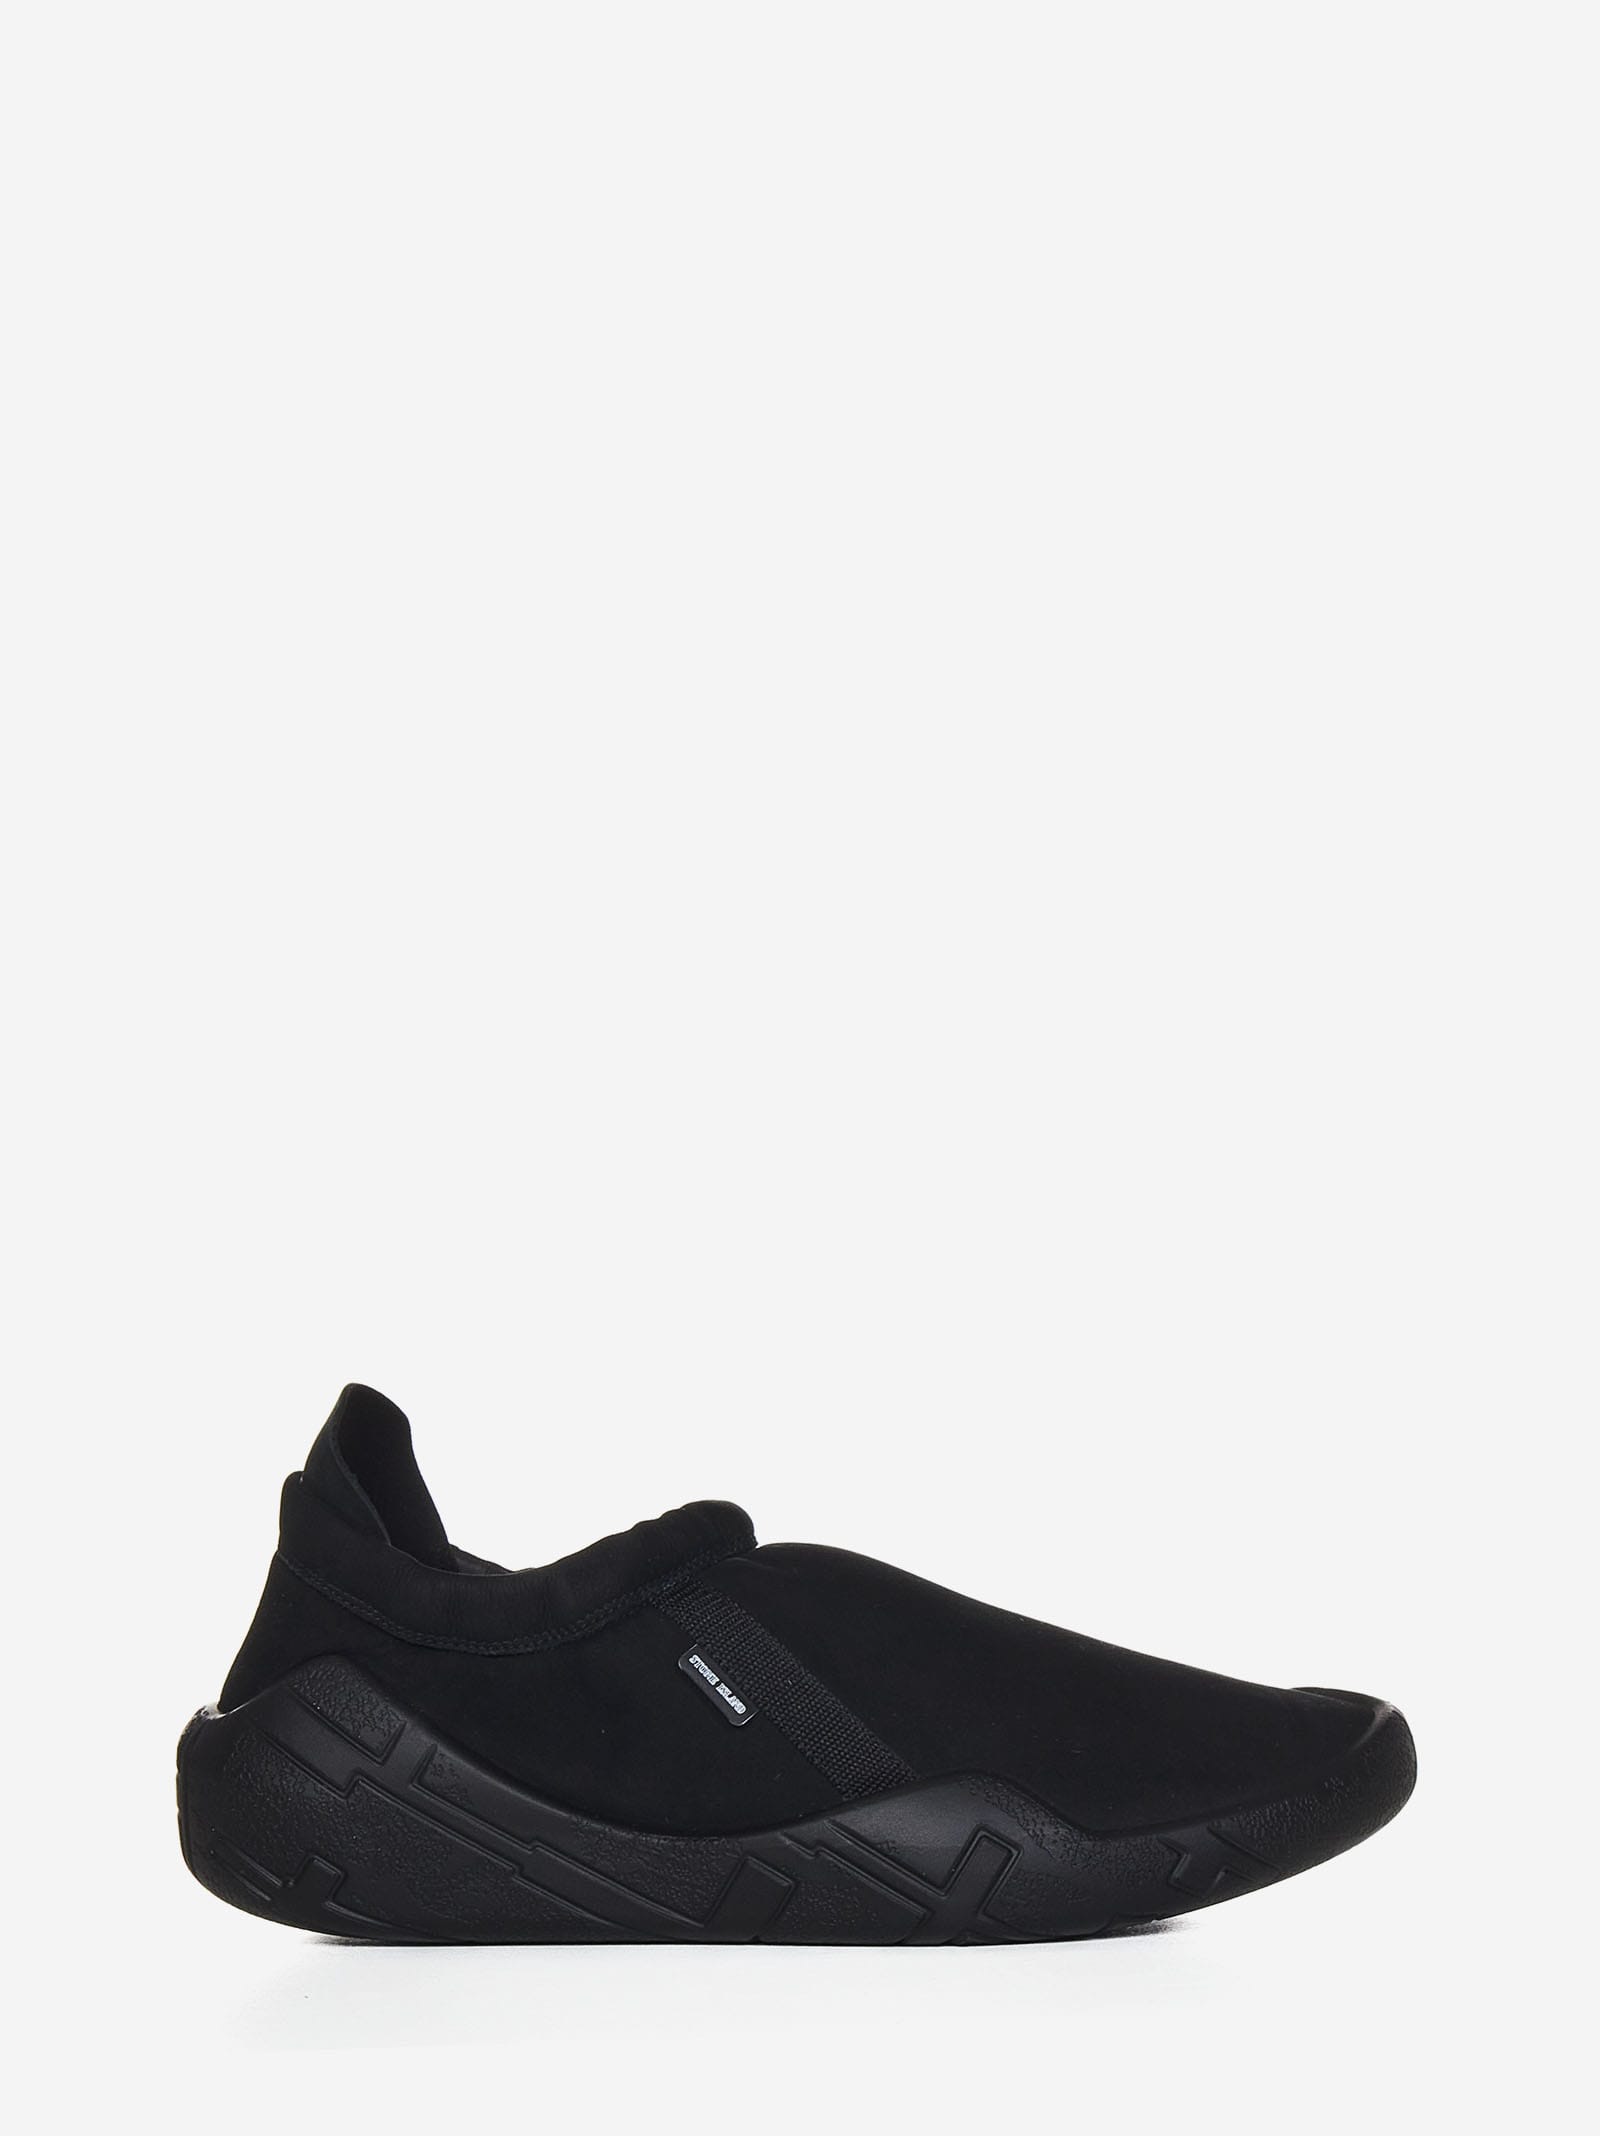 Stone Island Shadow Project S021g Shadow Moc_capitolo 1 Sneakers In Black